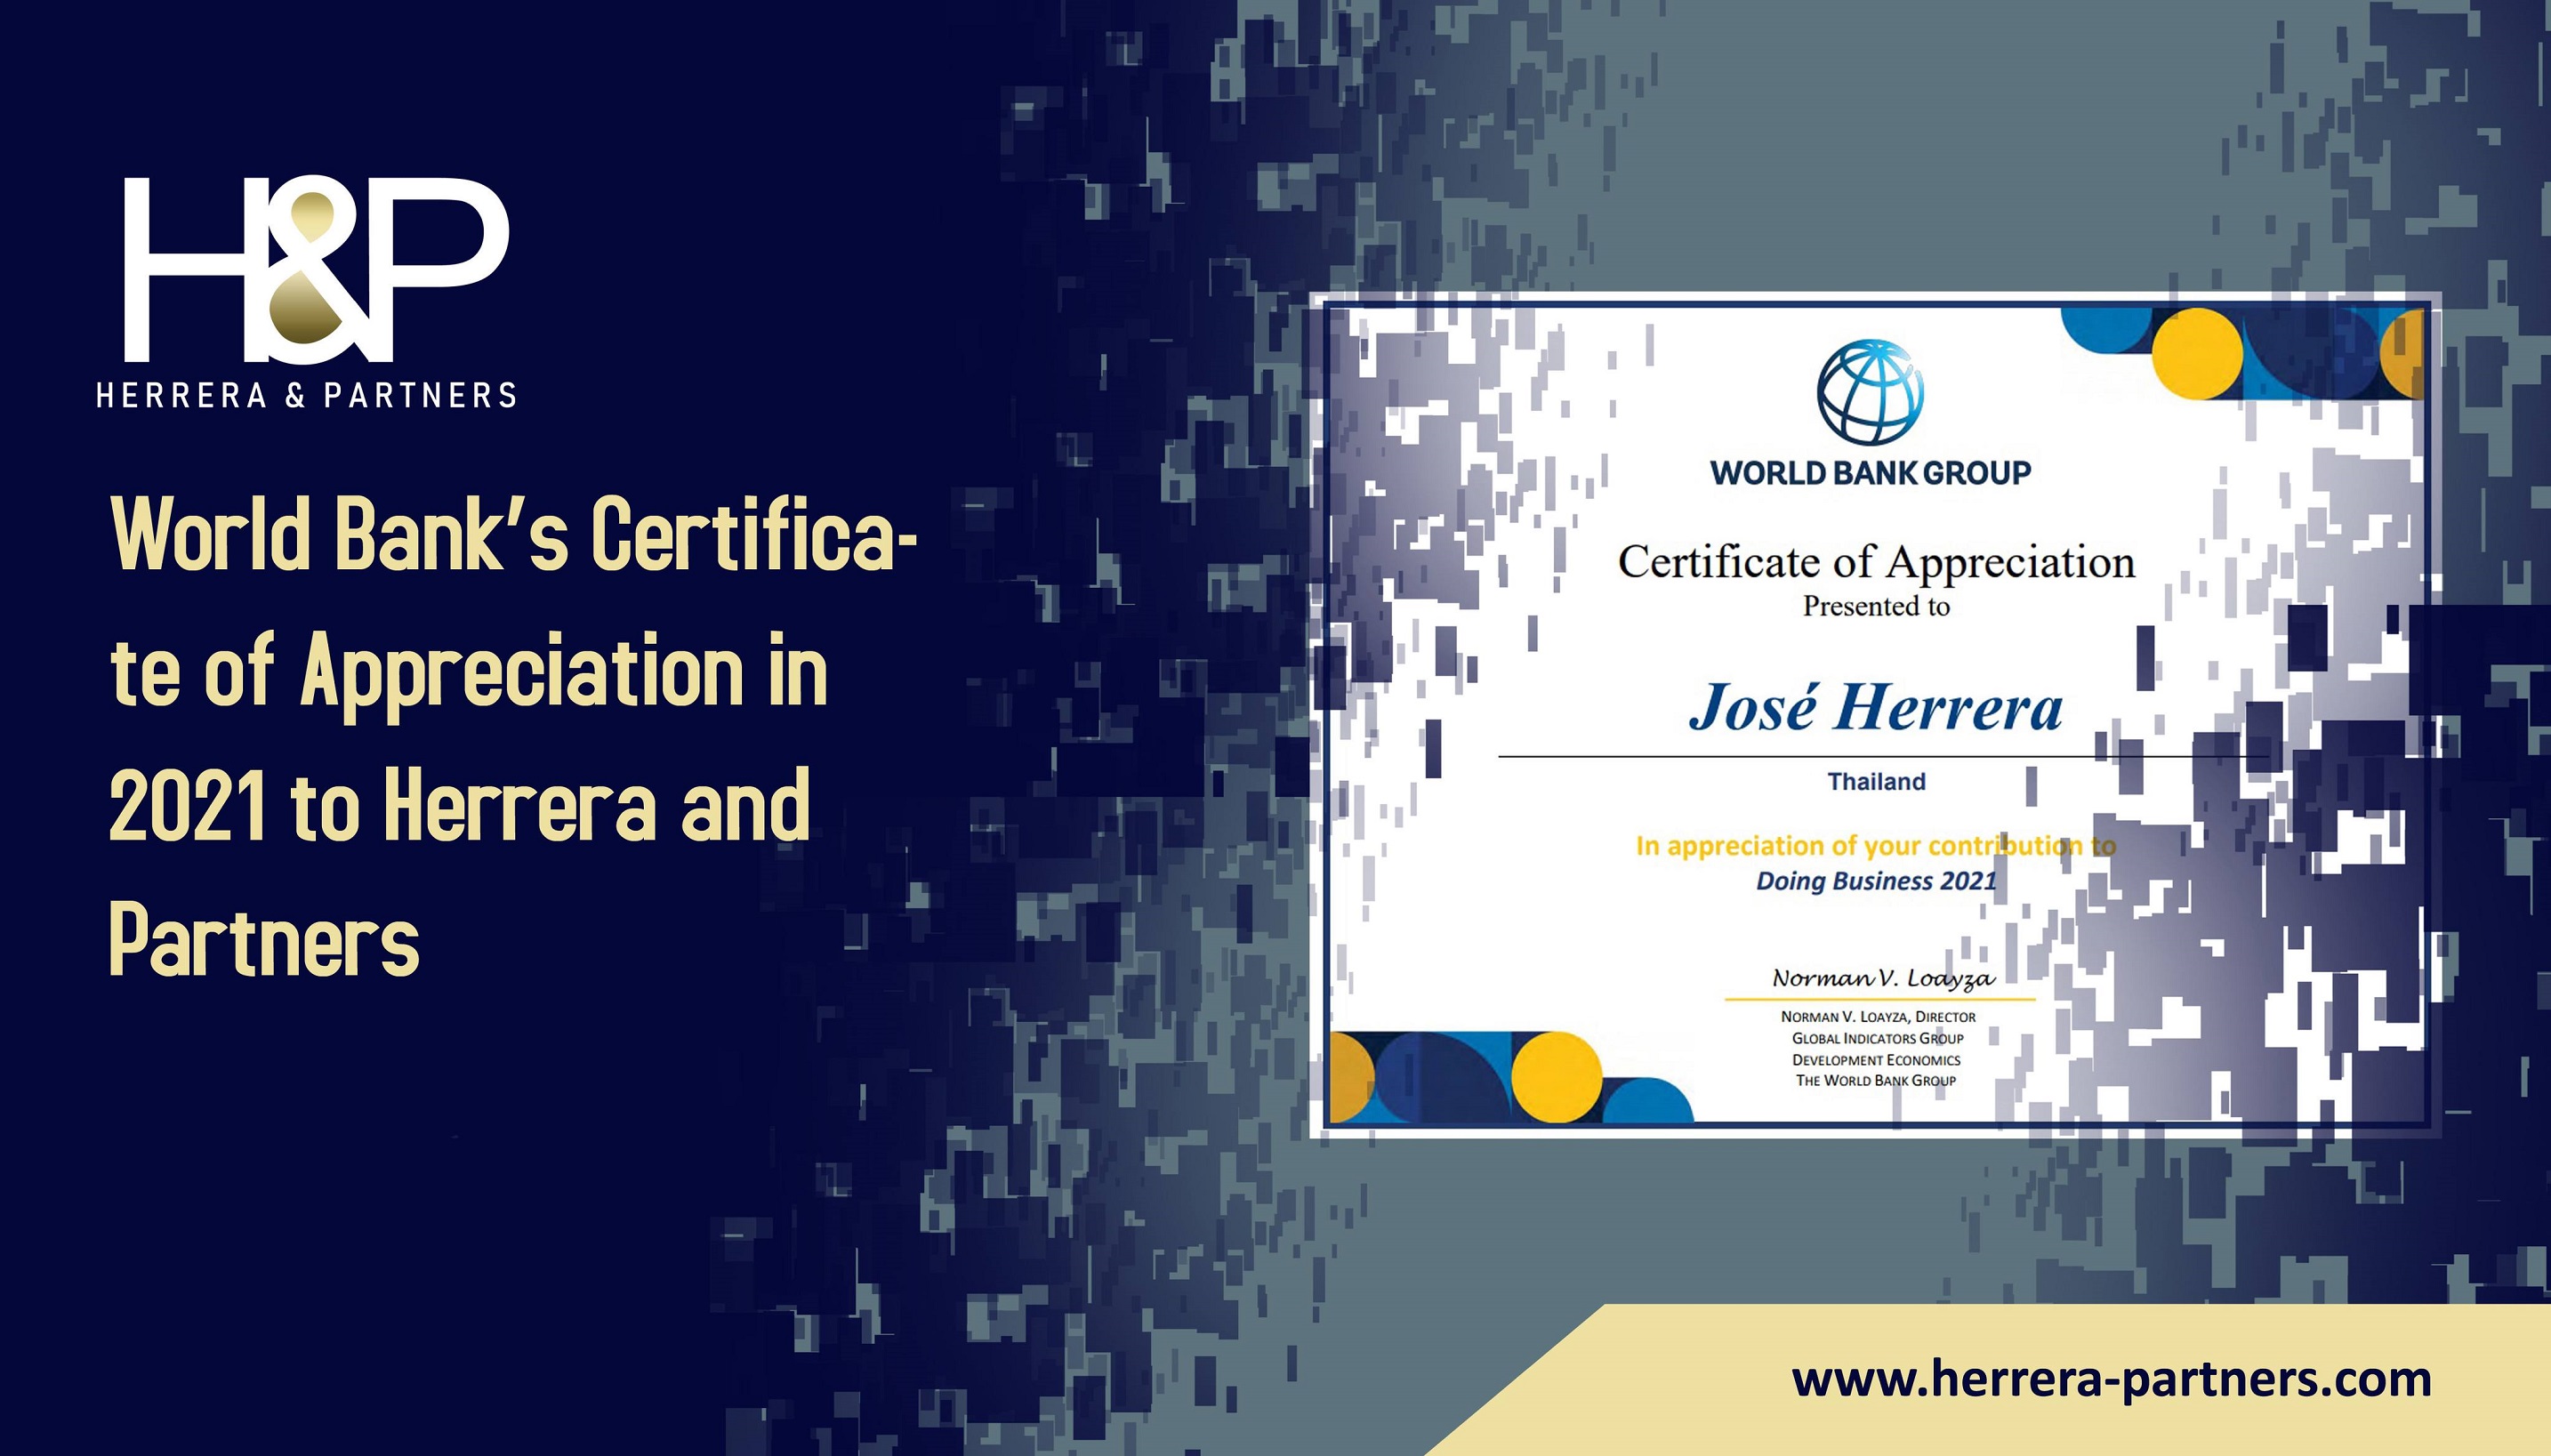 World Bank's Certificate of Appreciation in 2021 to Herrera and Partners H&P Corporate Law firm in Thailand